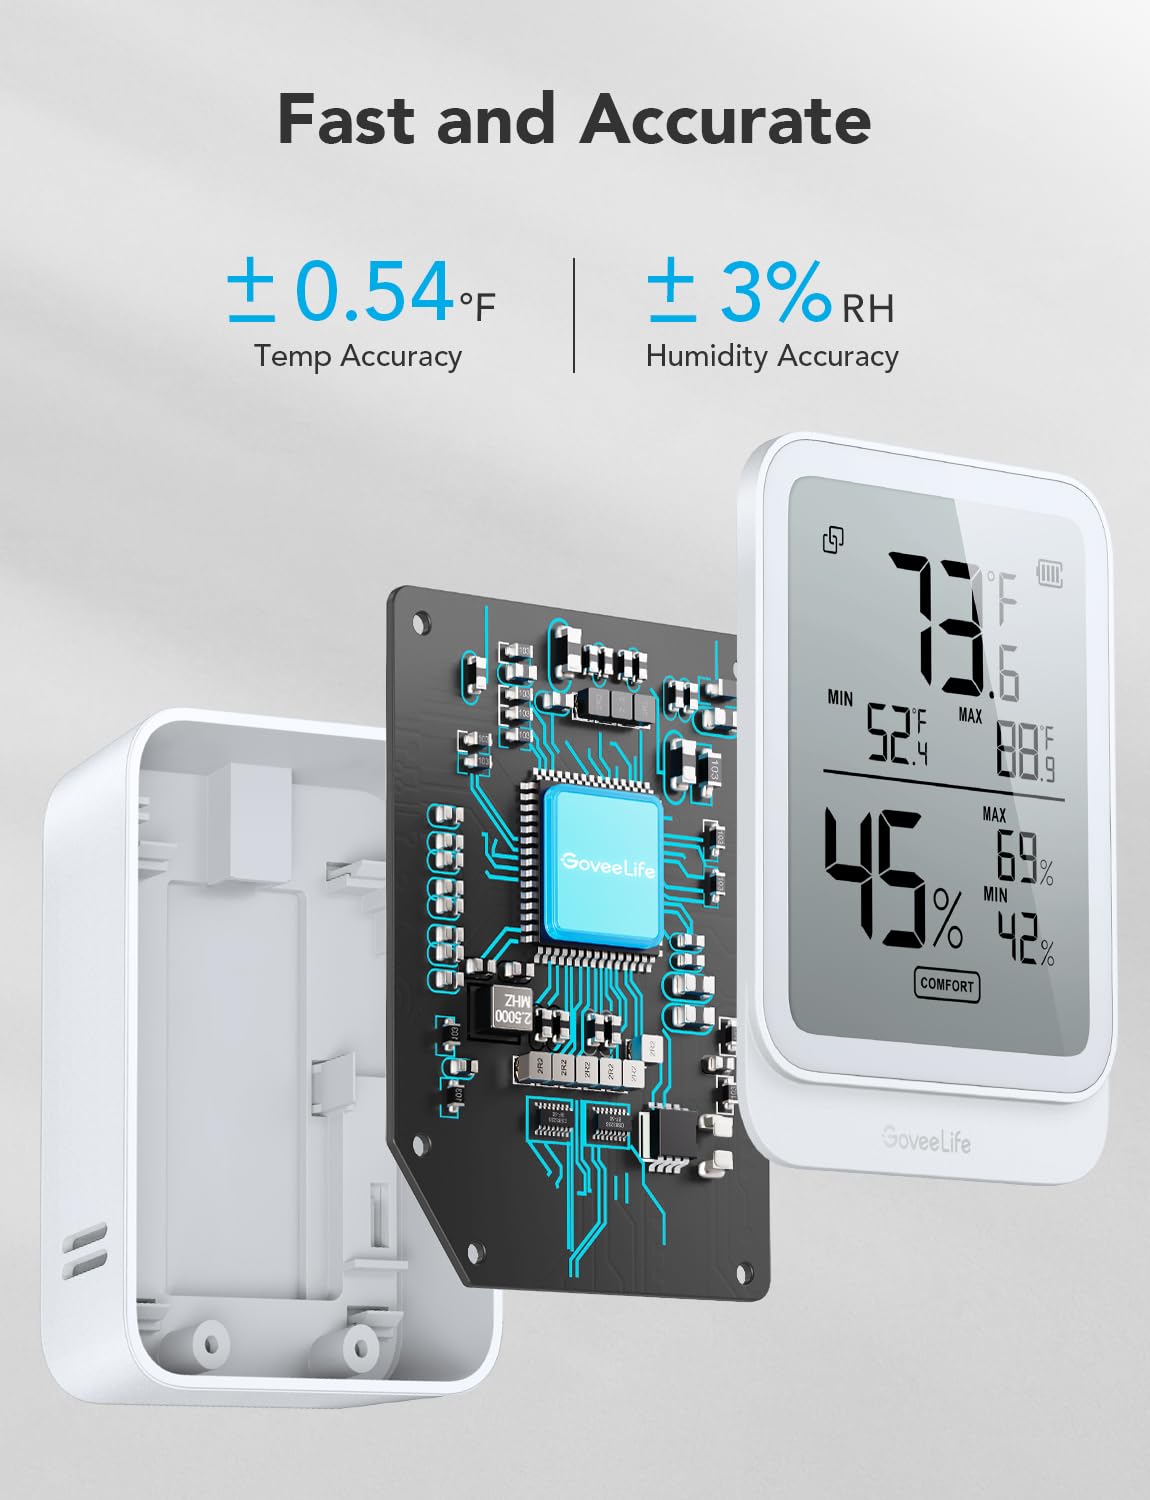 Govee WiFi Thermometer Hygrometer, Wireless Digital Indoor Temperature  Gauge Humidity Monitor with App Alerts, for Home